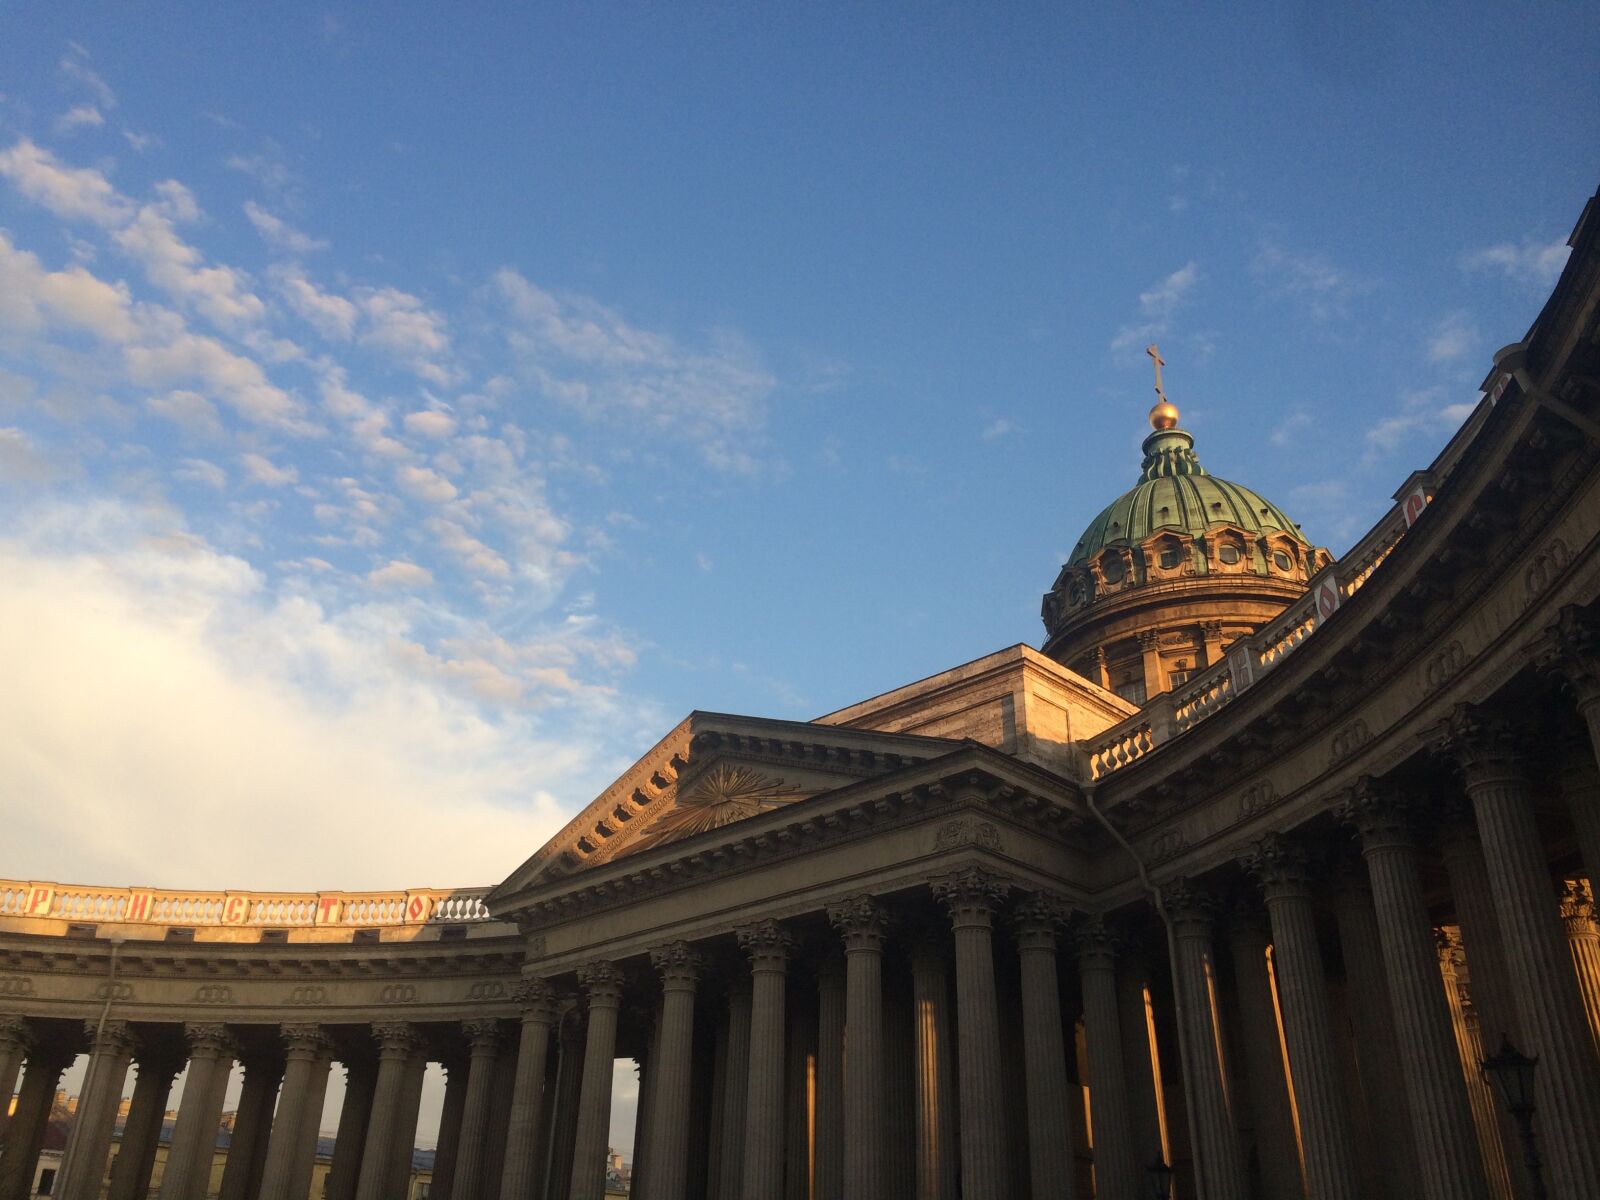 Apple iPhone 5s sample photo. Saint isaac's cathedral, russia photography